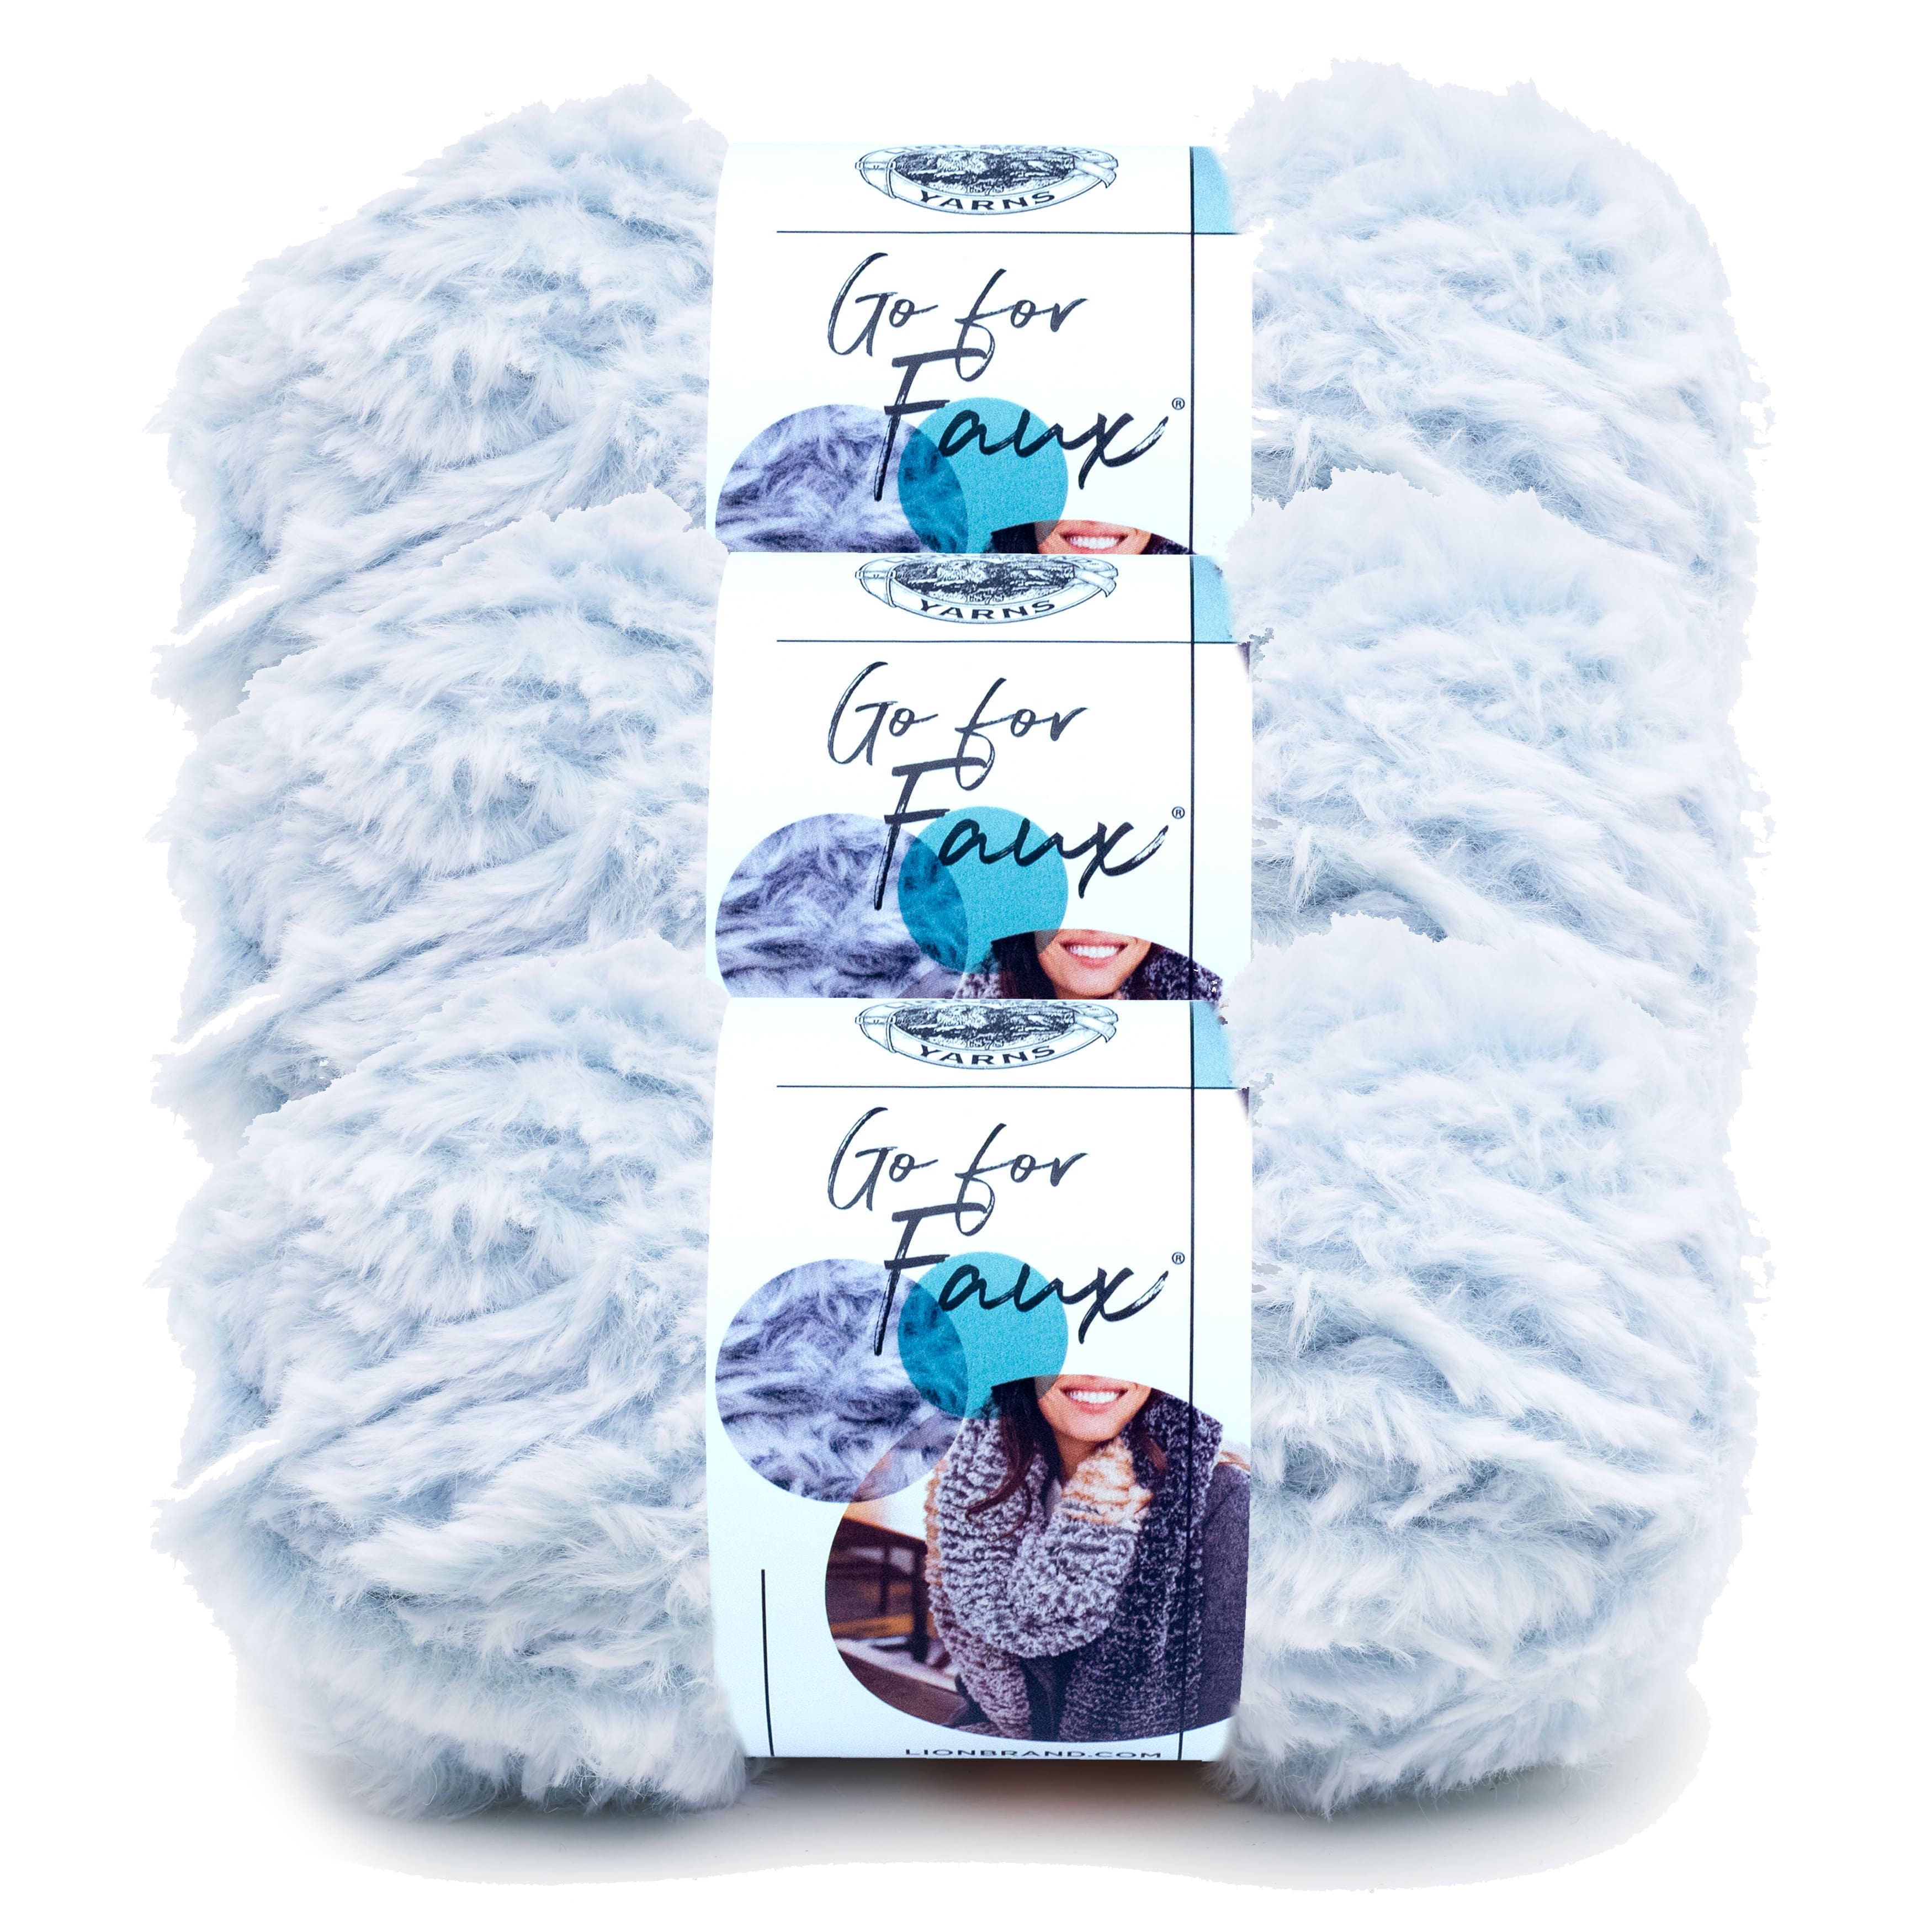 Lion Brand Go For Faux-Bag of 3 Yarn Pack